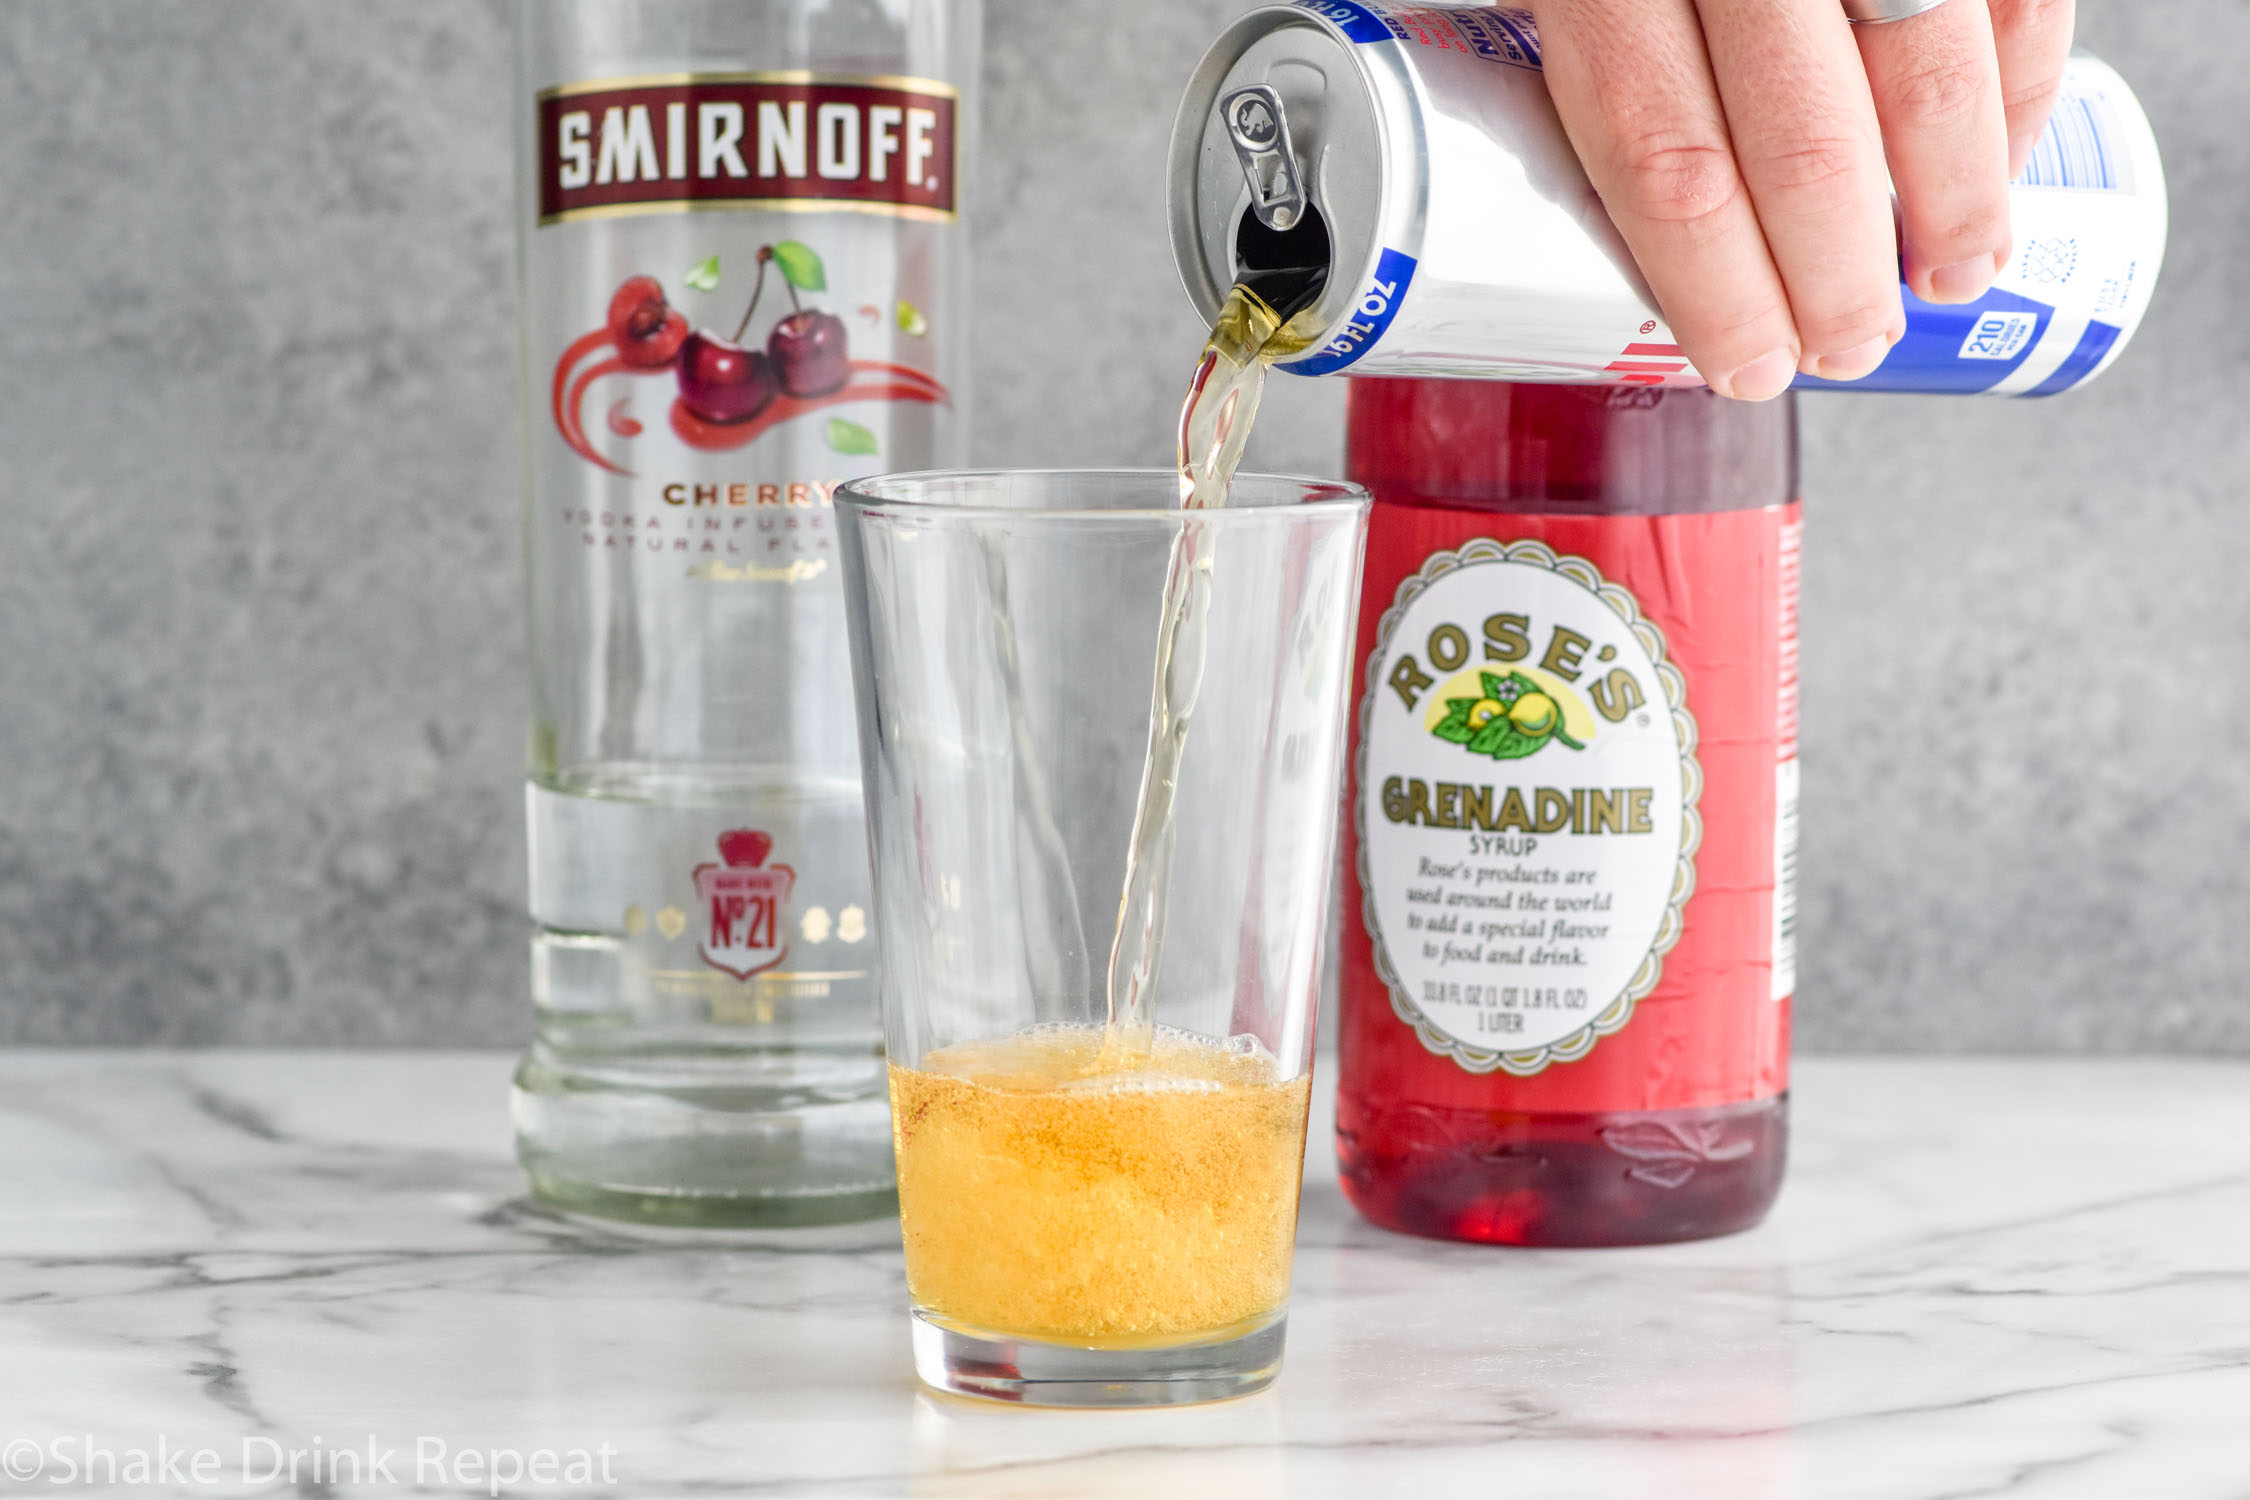 Side view of person's hand pouring a can of Red Bull into a pint glass for Cherry Bomb Shot recipe. Bottles of cherry vodka and grenadine behind glass for recipe.